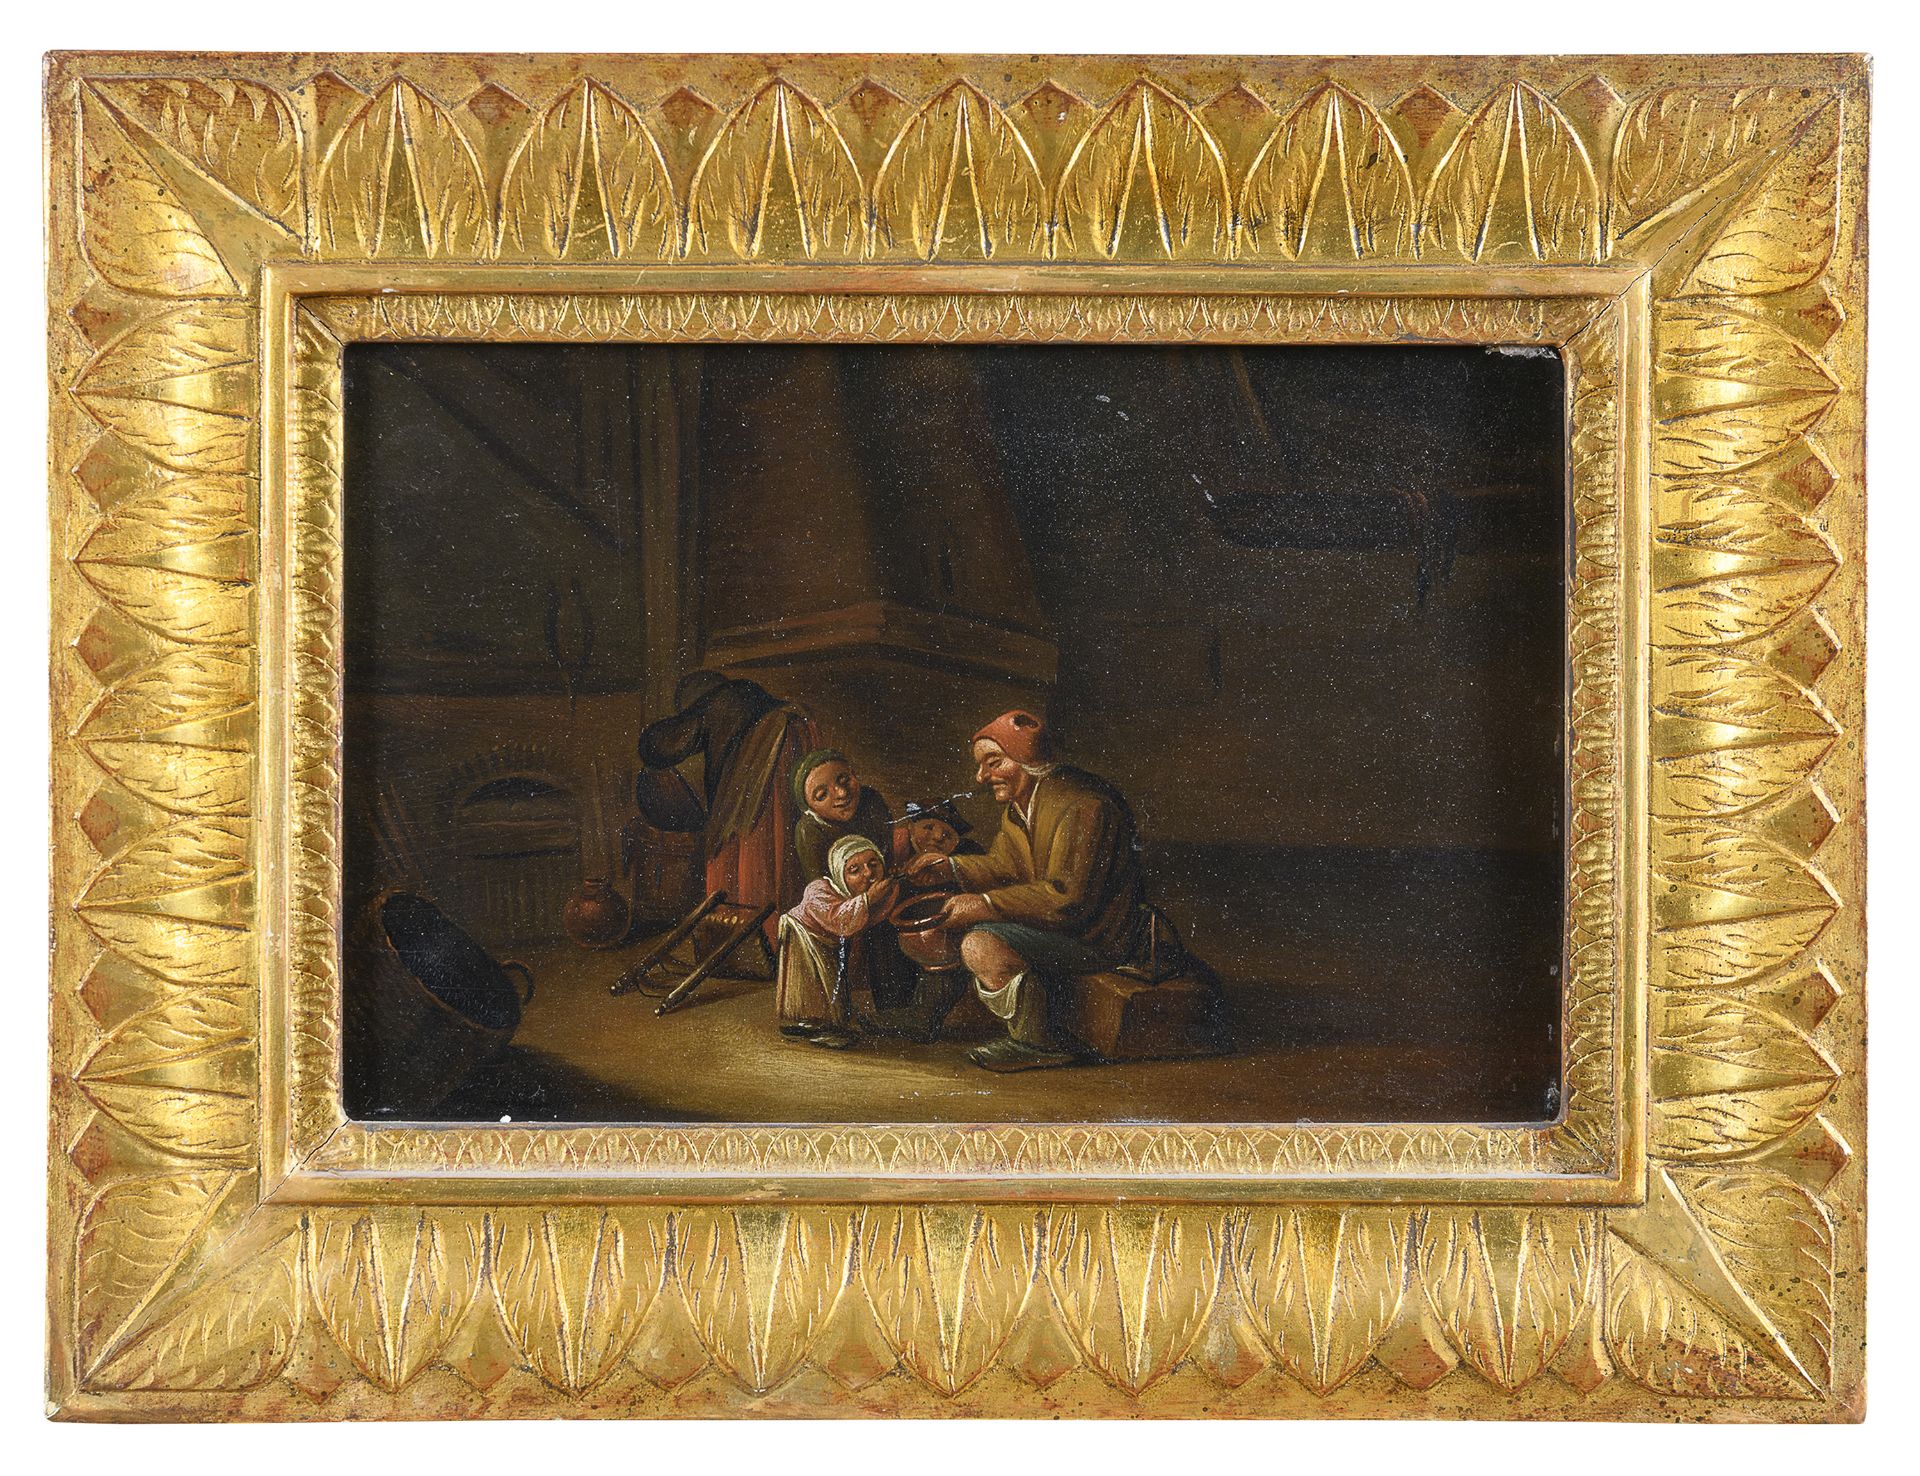 PAIR OF FLEMISH OIL PAINTINGS 19TH CENTURY - Image 2 of 2